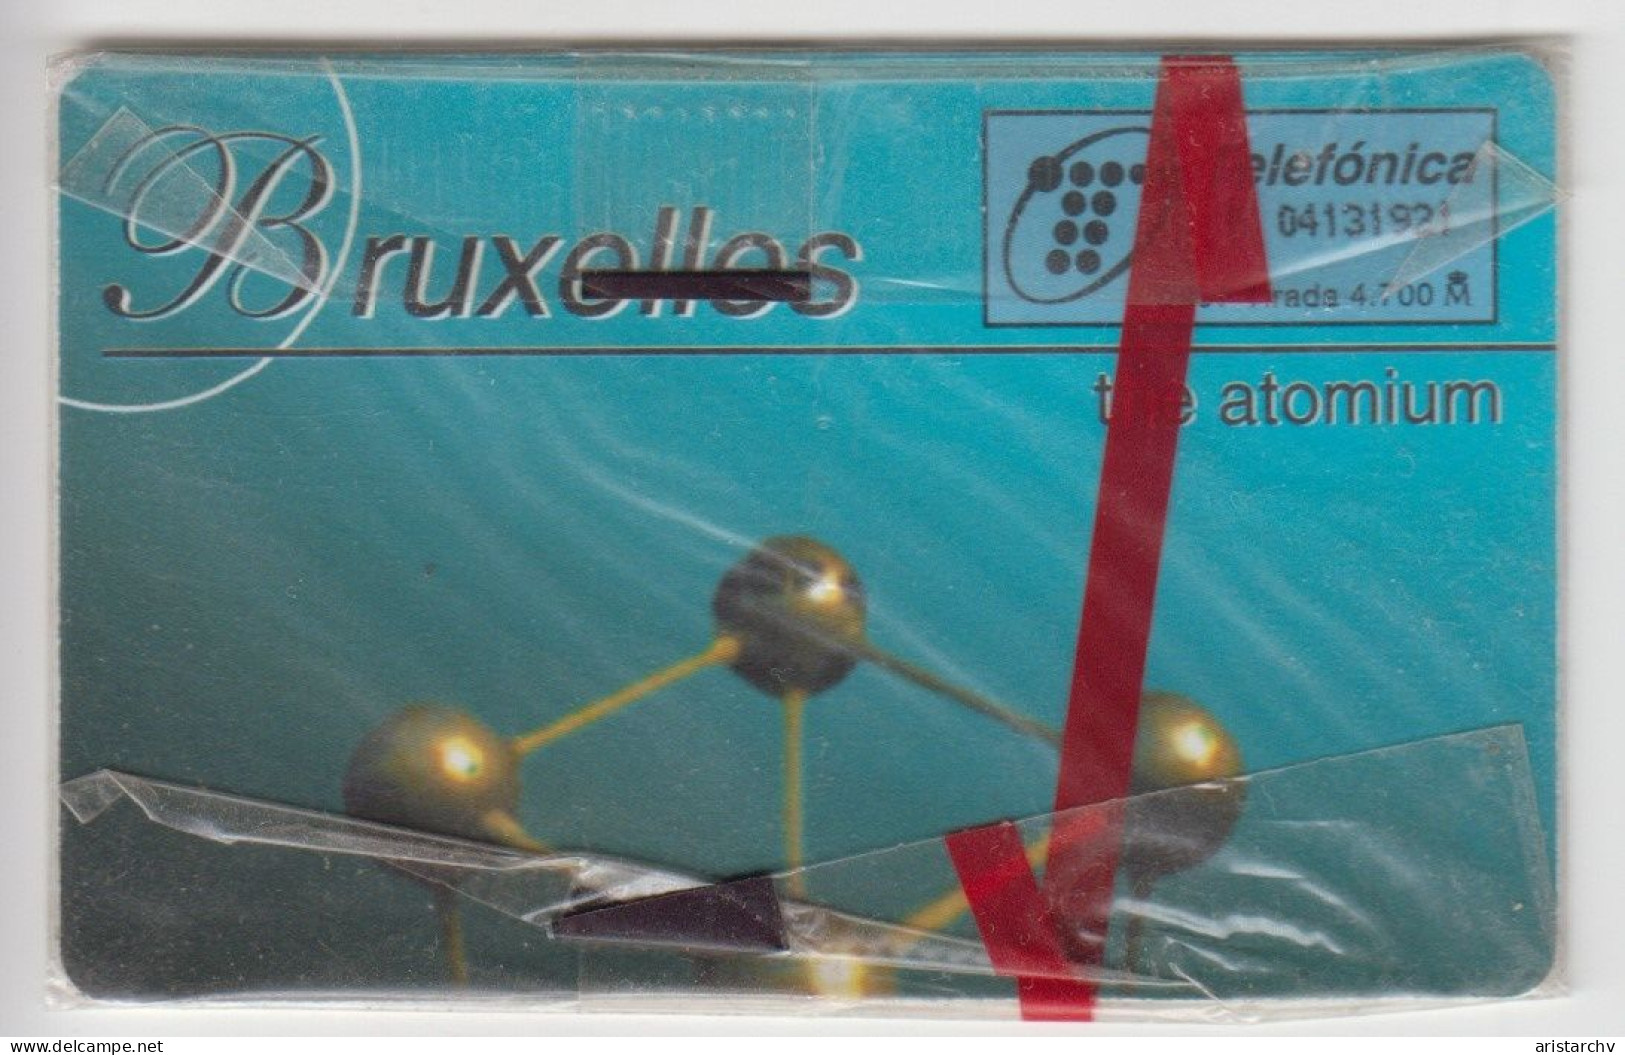 SPAIN 1997 CARD COLLECT '98 THESSALONIKI GREECE BRUXELLES ATOMIUM MINT CARD IN BLISTER - Emissions Privées